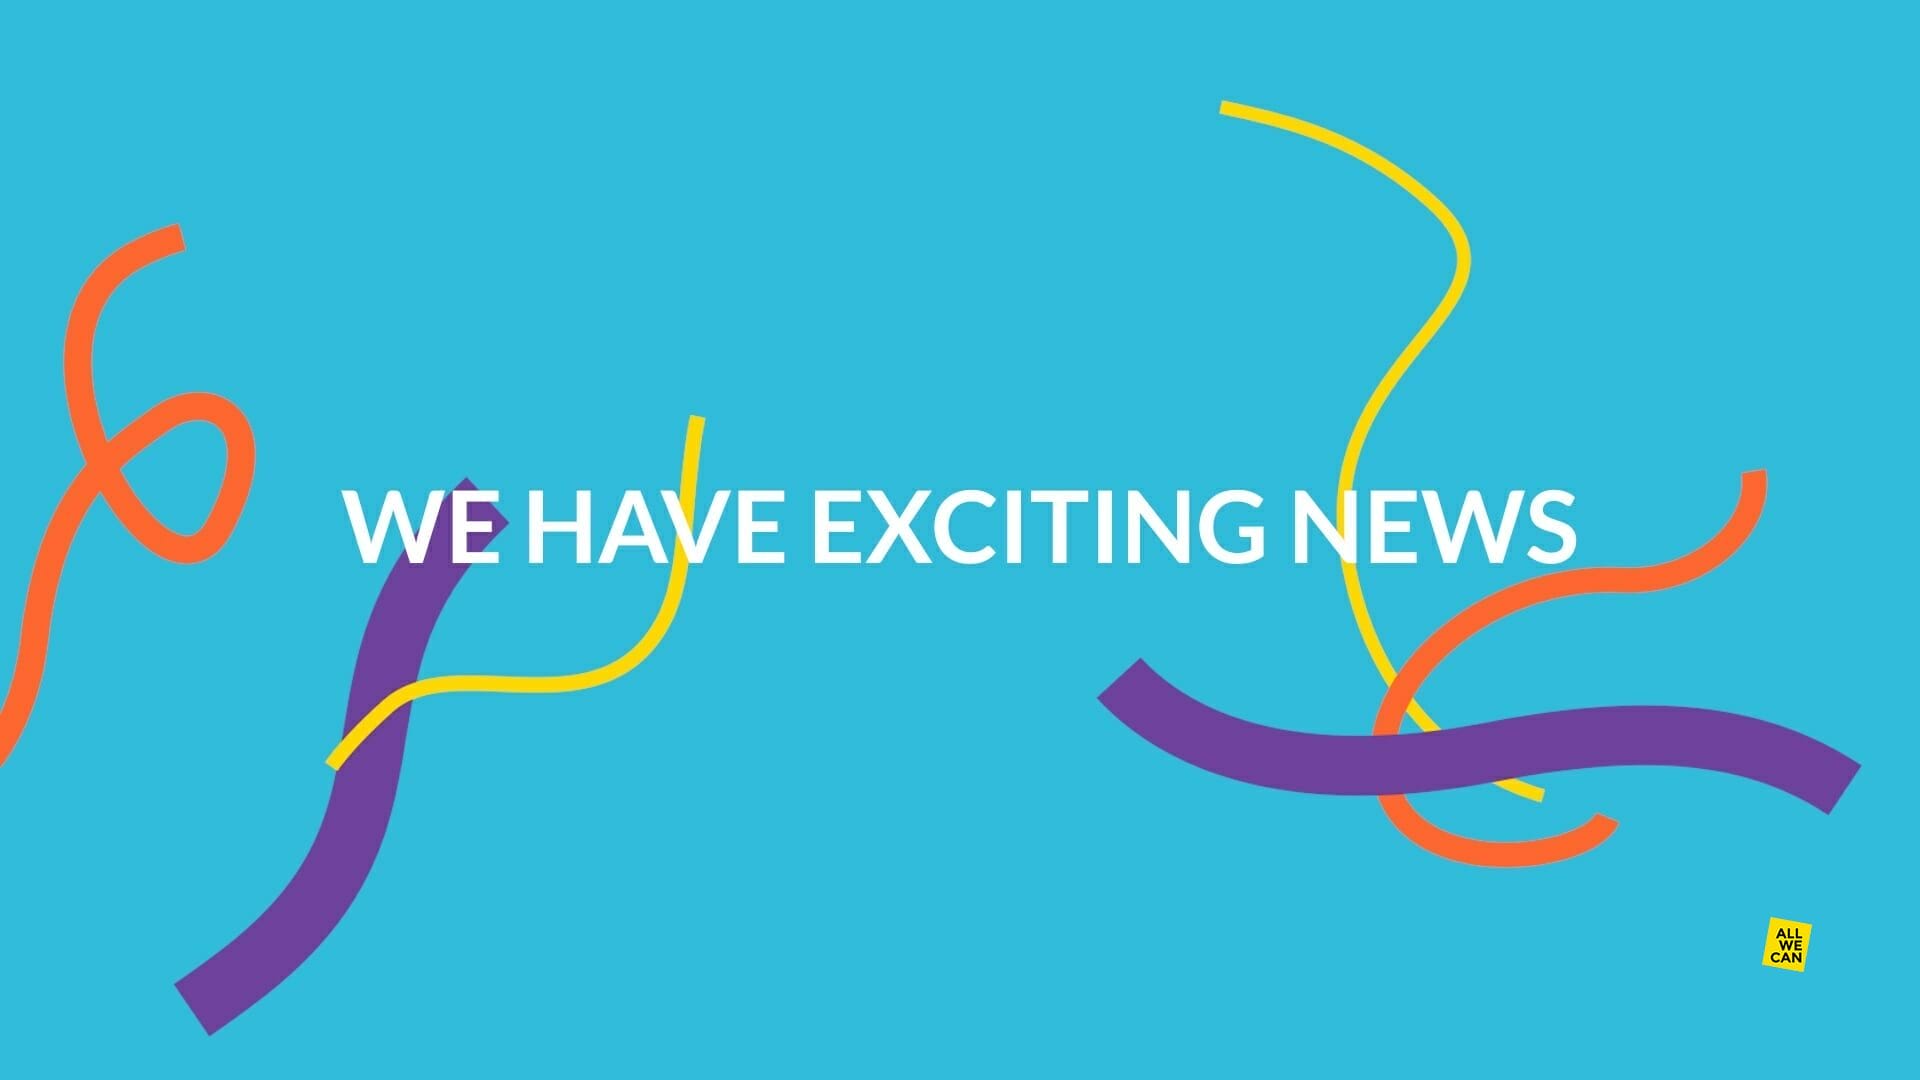 Text reads 'we have exciting news' on a blue background with ribbon graphics.